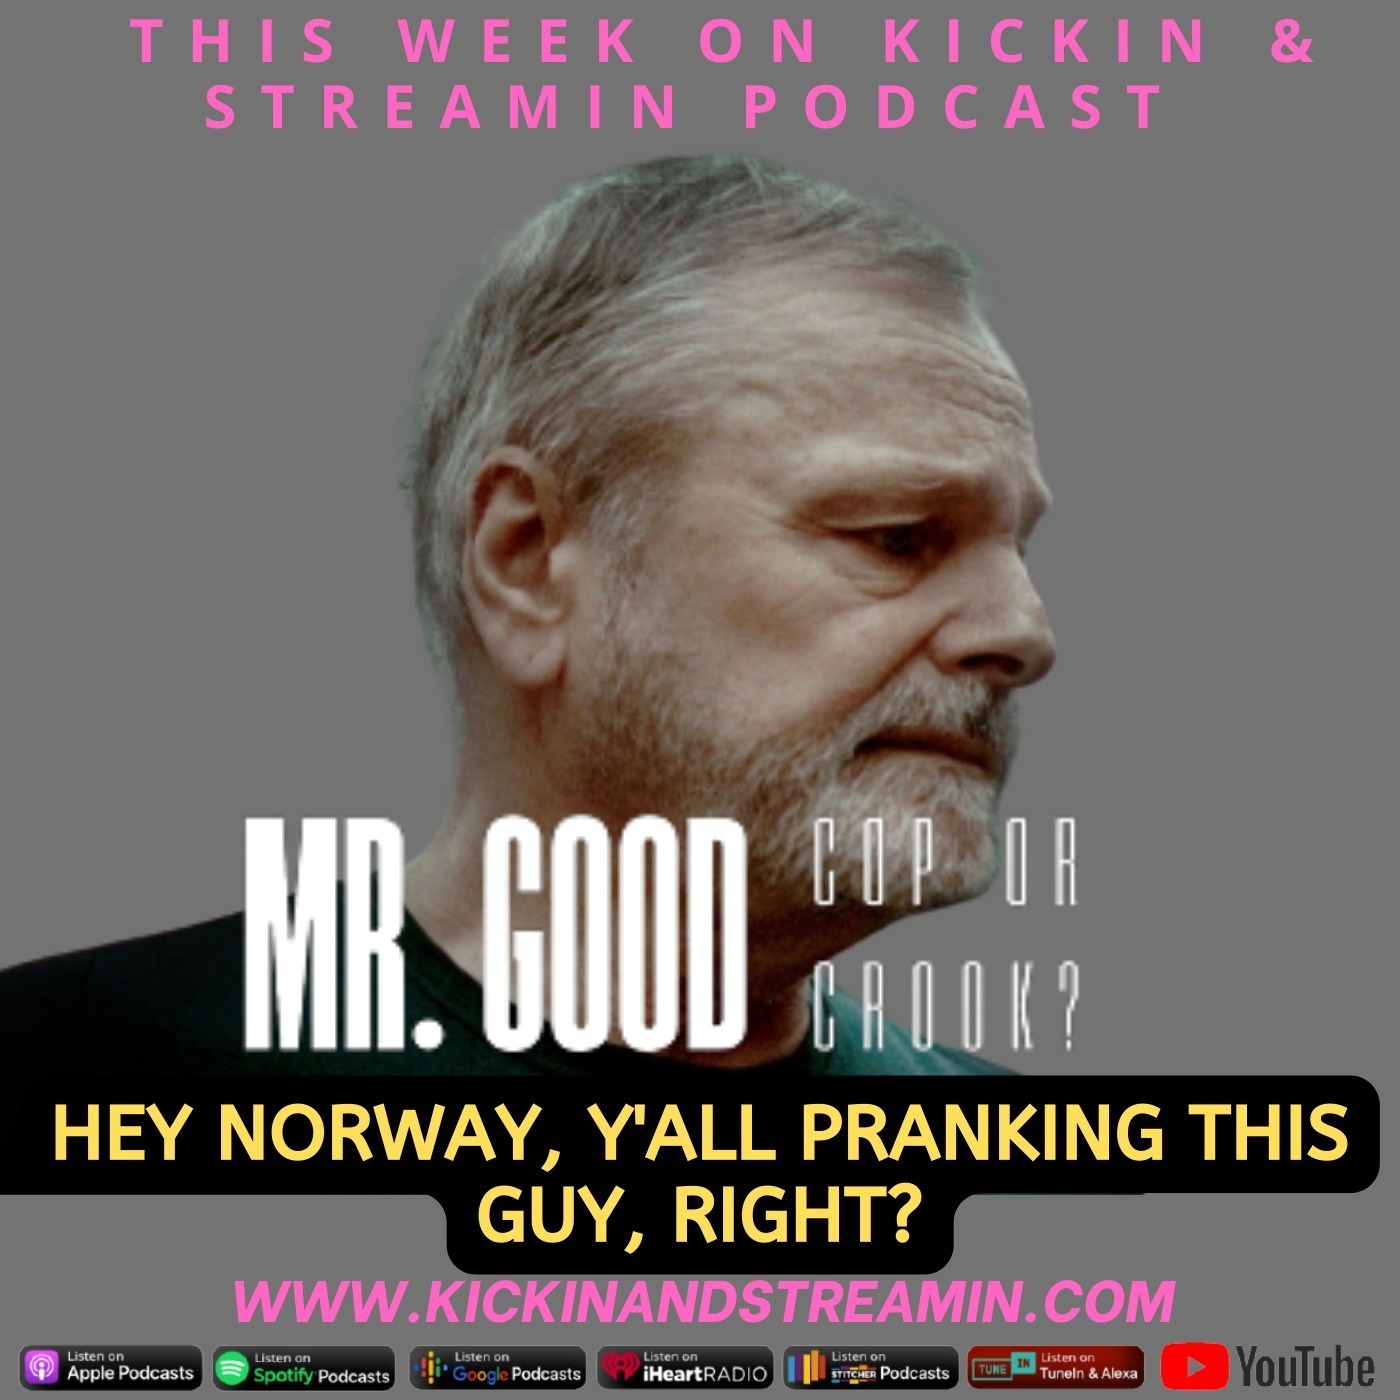 Mr. Good: Cop or Crook. Hey Norway, Y'all Pranking This Guy, Right? Image